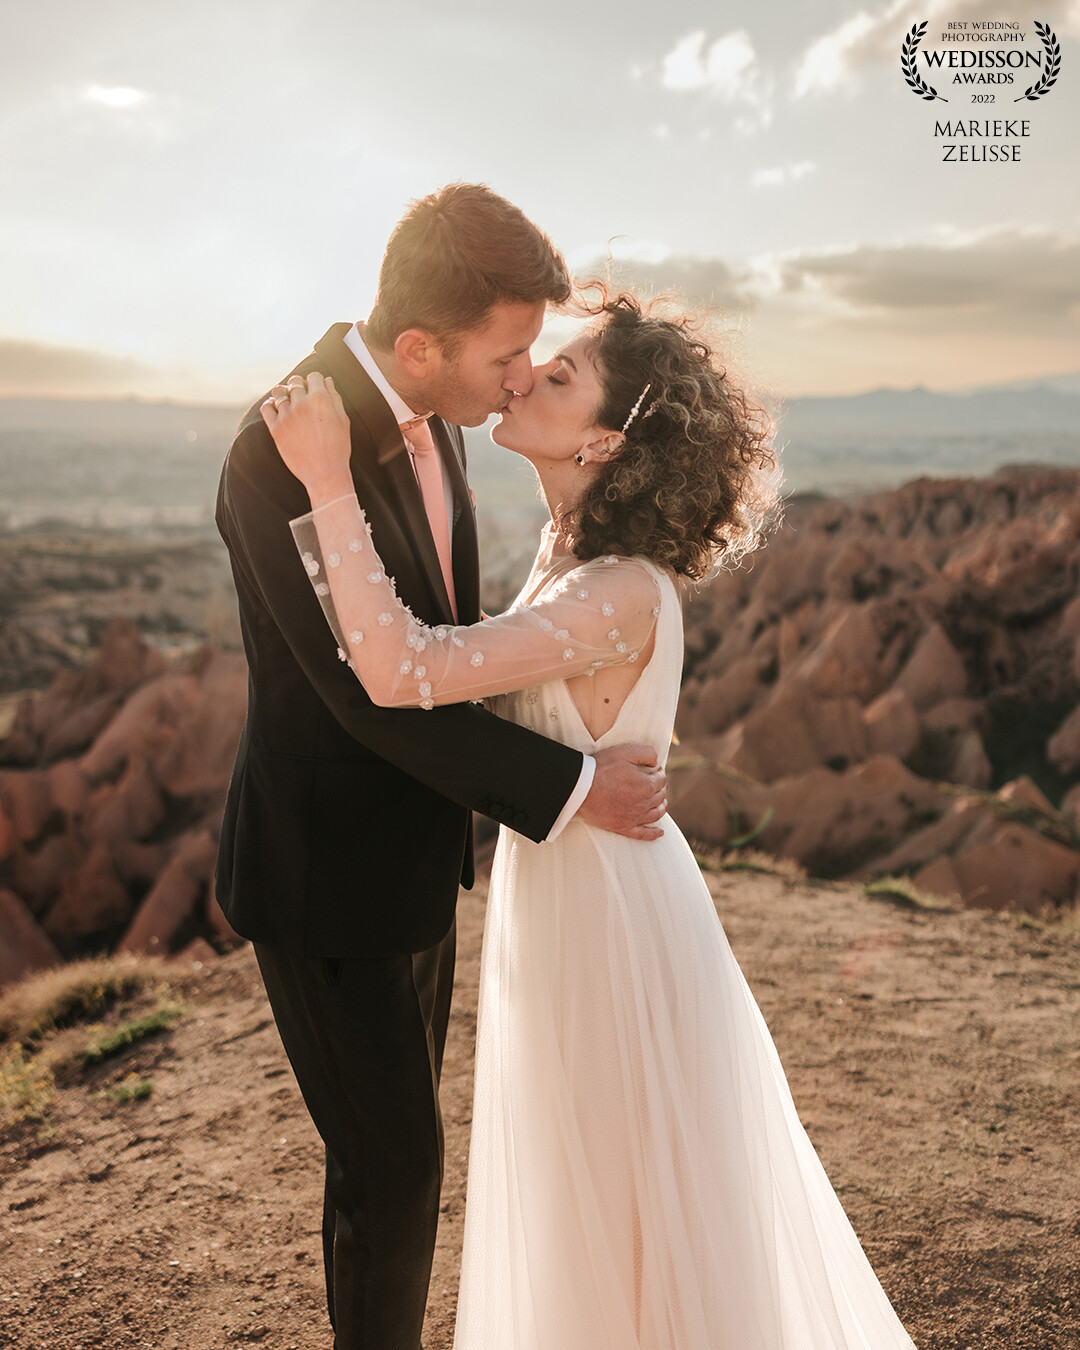 Cappadocia is one of the most beautiful places I've ever been, this shot is taken with sundown above the Red Valley. I loved the passion of this beautiful couple!